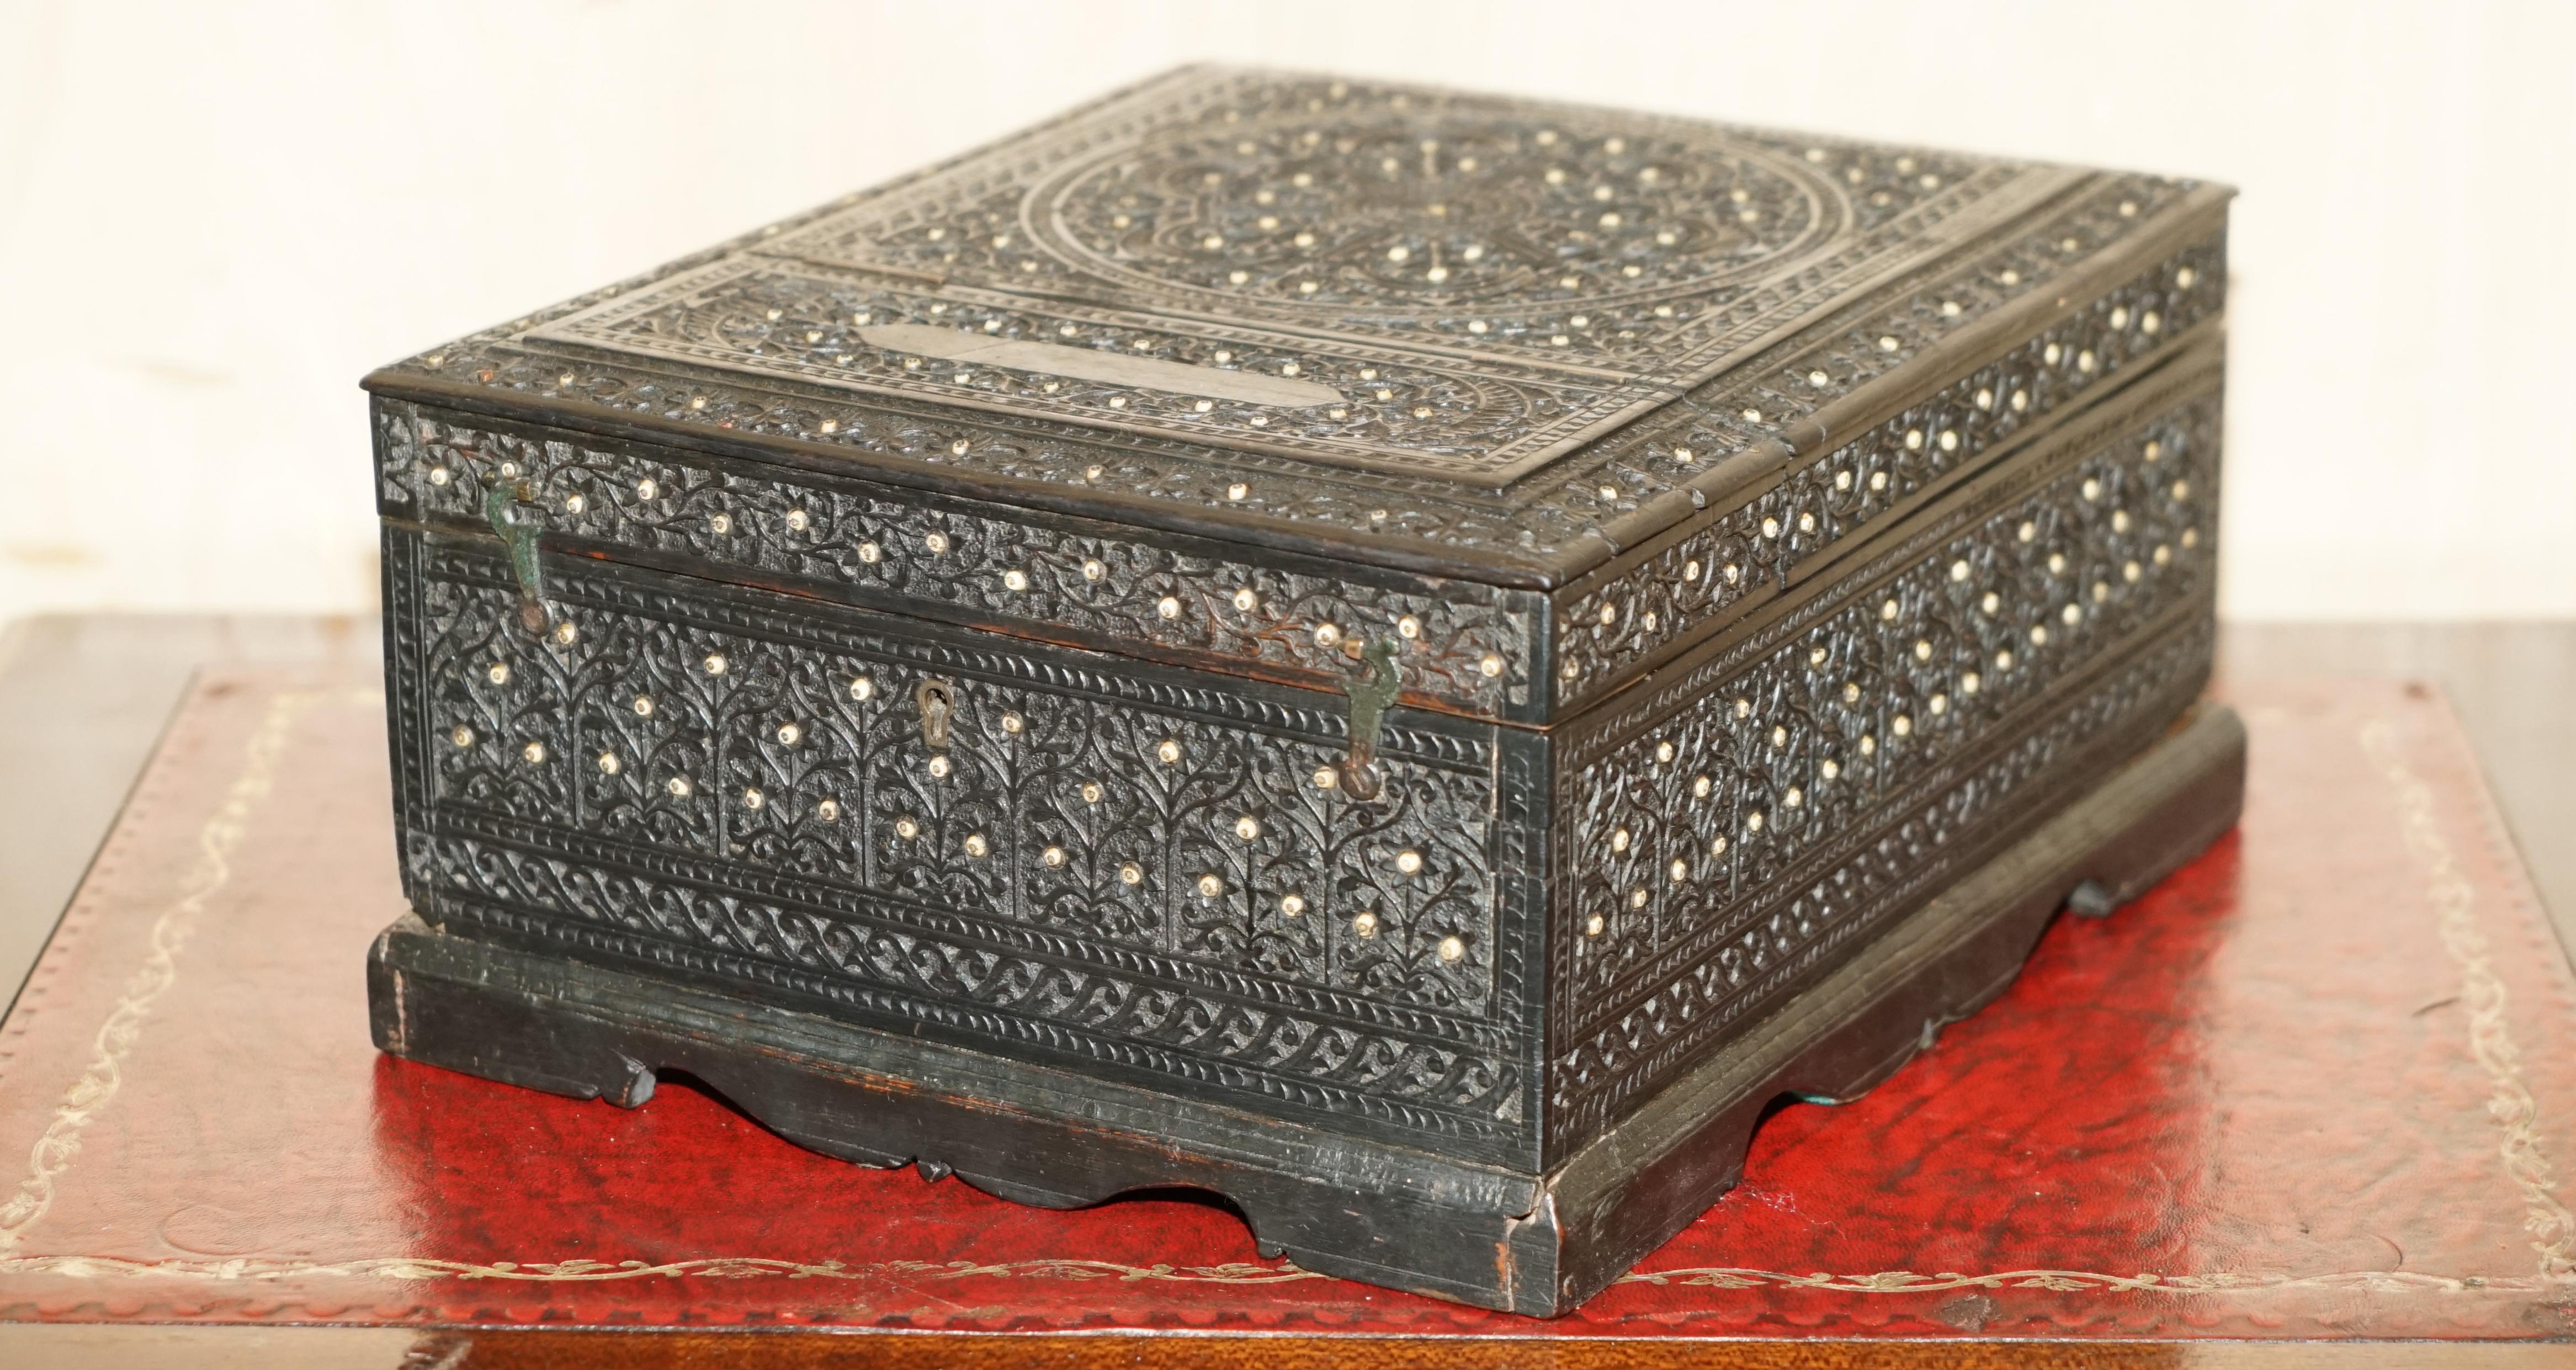 Royal House Antiques

Royal House Antiques is delighted to offer for sale this absolutely stunning original circa 1880 Burmese hand carved sewing box with the original contents 

Please note the delivery fee listed is just a guide, it covers within